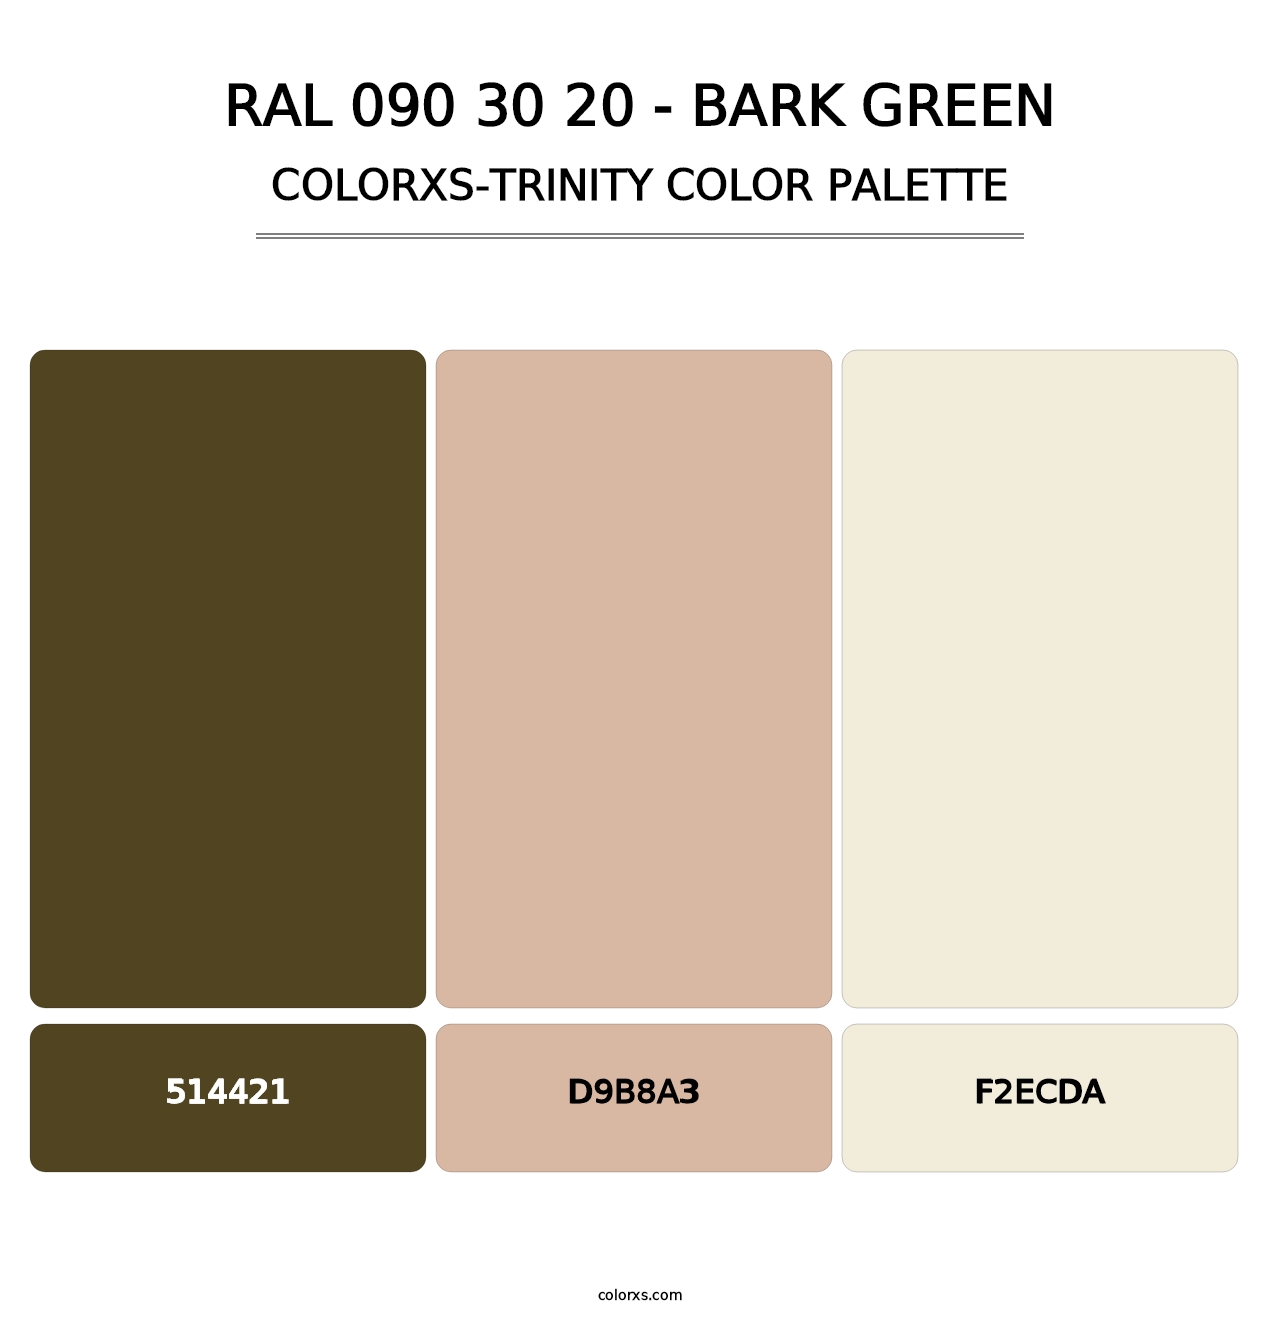 RAL 090 30 20 - Bark Green - Colorxs Trinity Palette